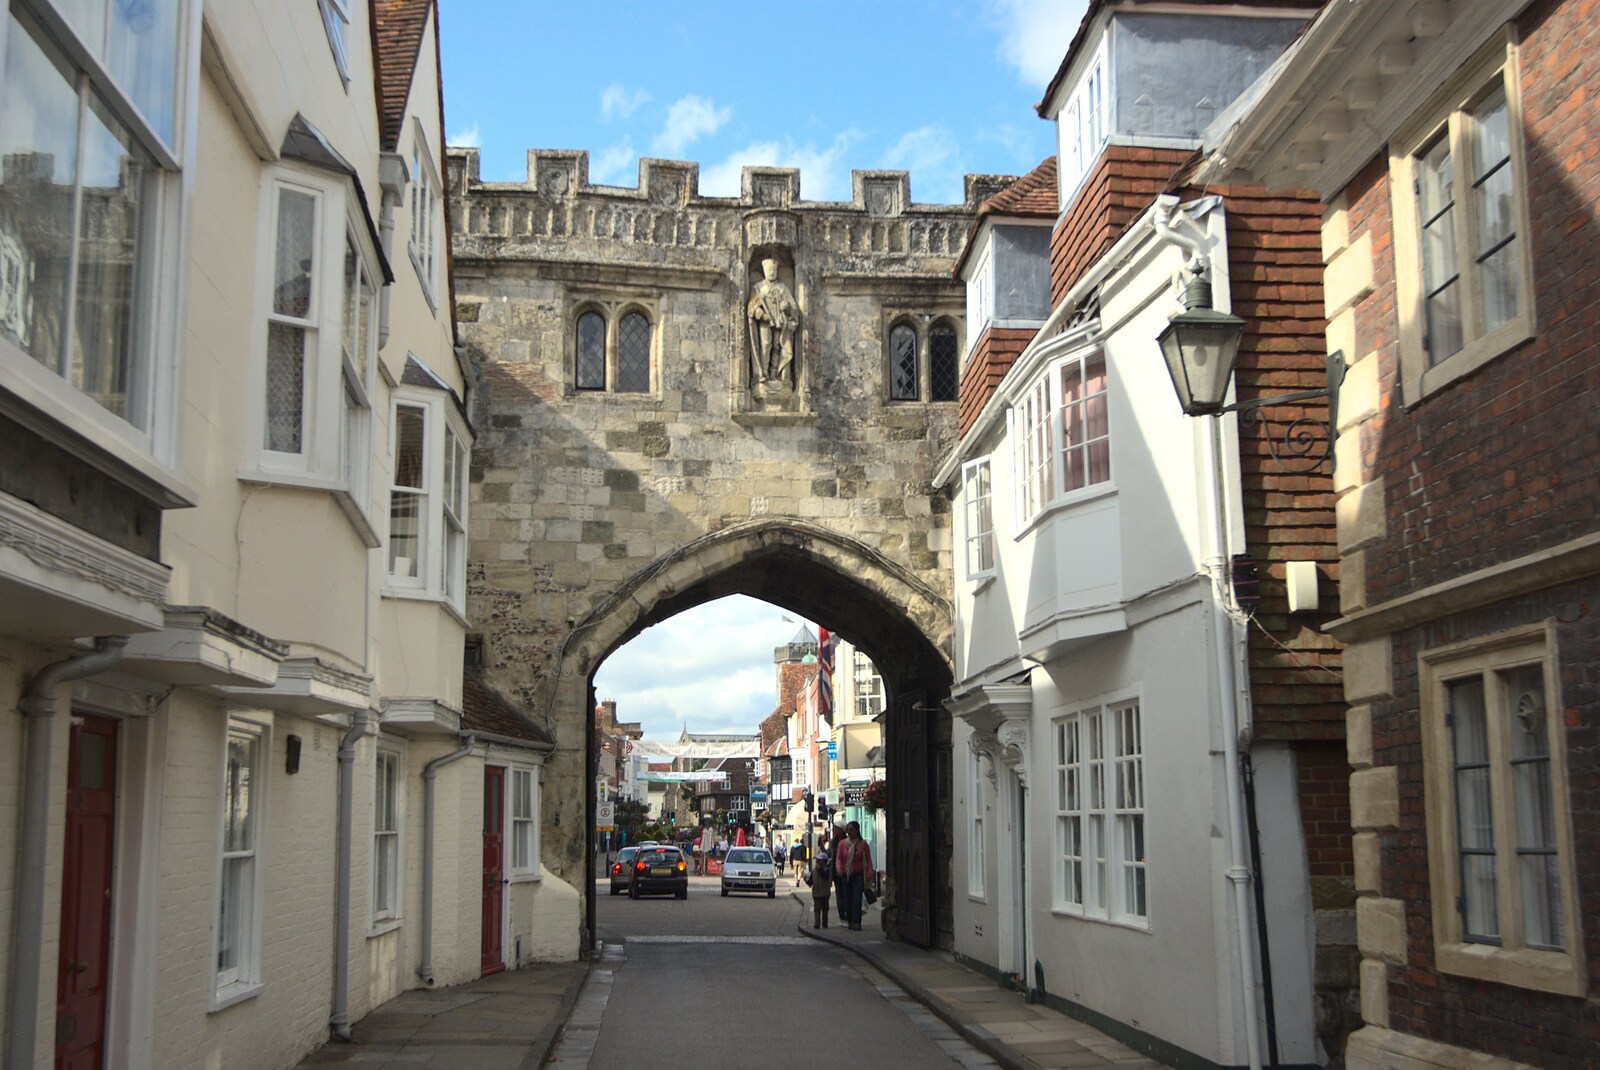 One of Salisbury's ancient city gates from A Camper Van Odyssey: Oxford, Salisbury, New Forest and Barton-on-Sea - 19th June 2011